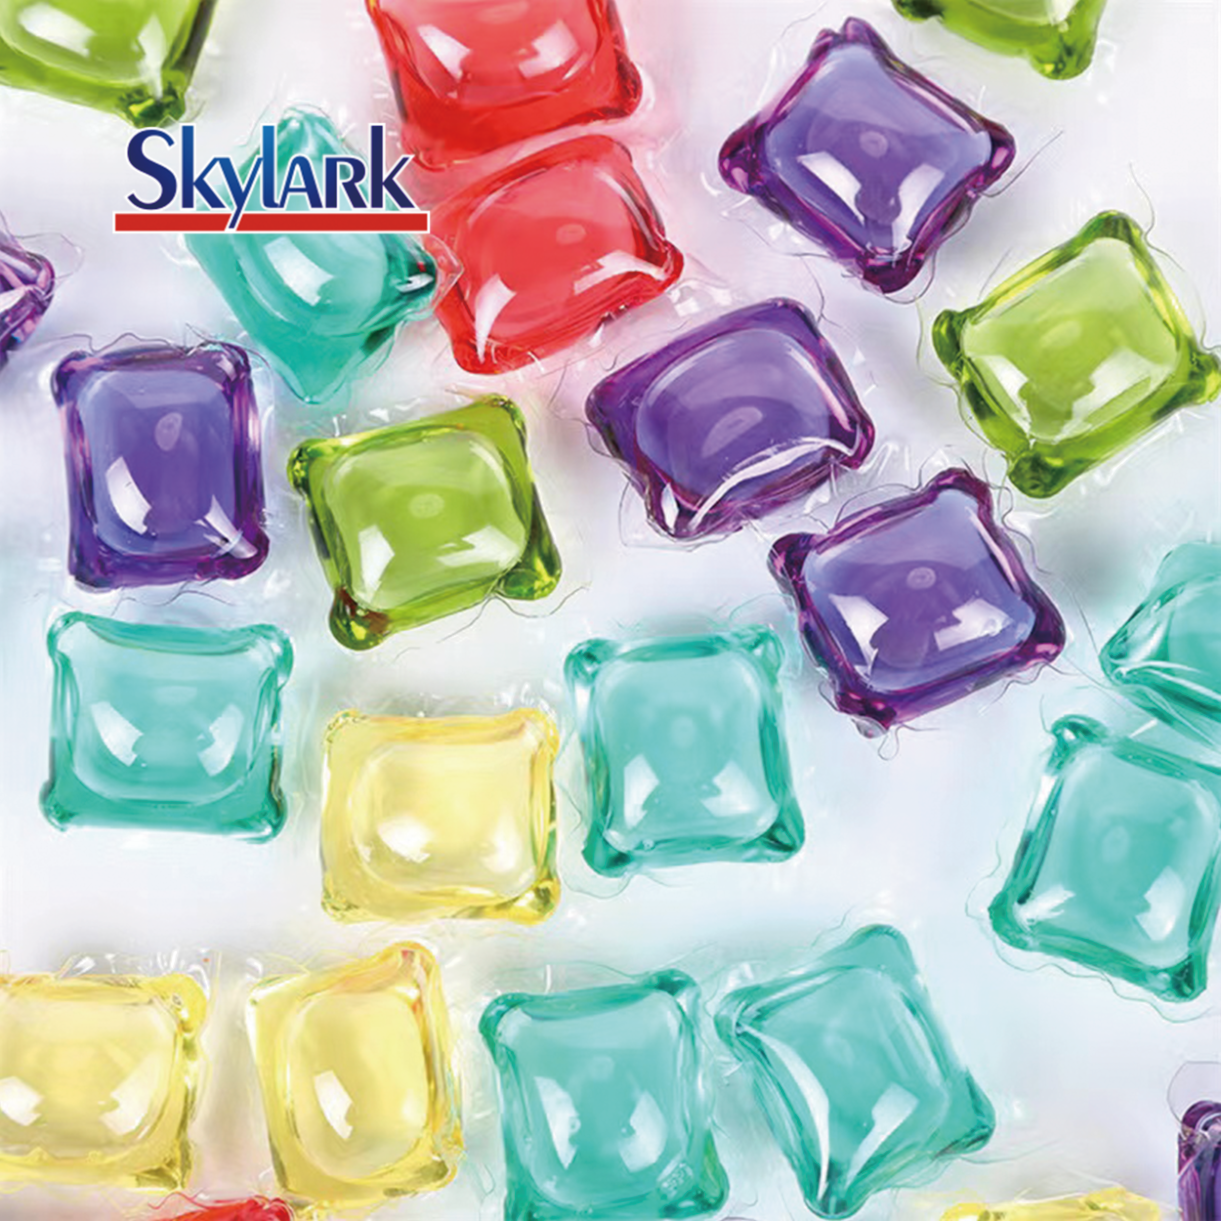 Professional Laundry Detergent Pods With Excellent Performance